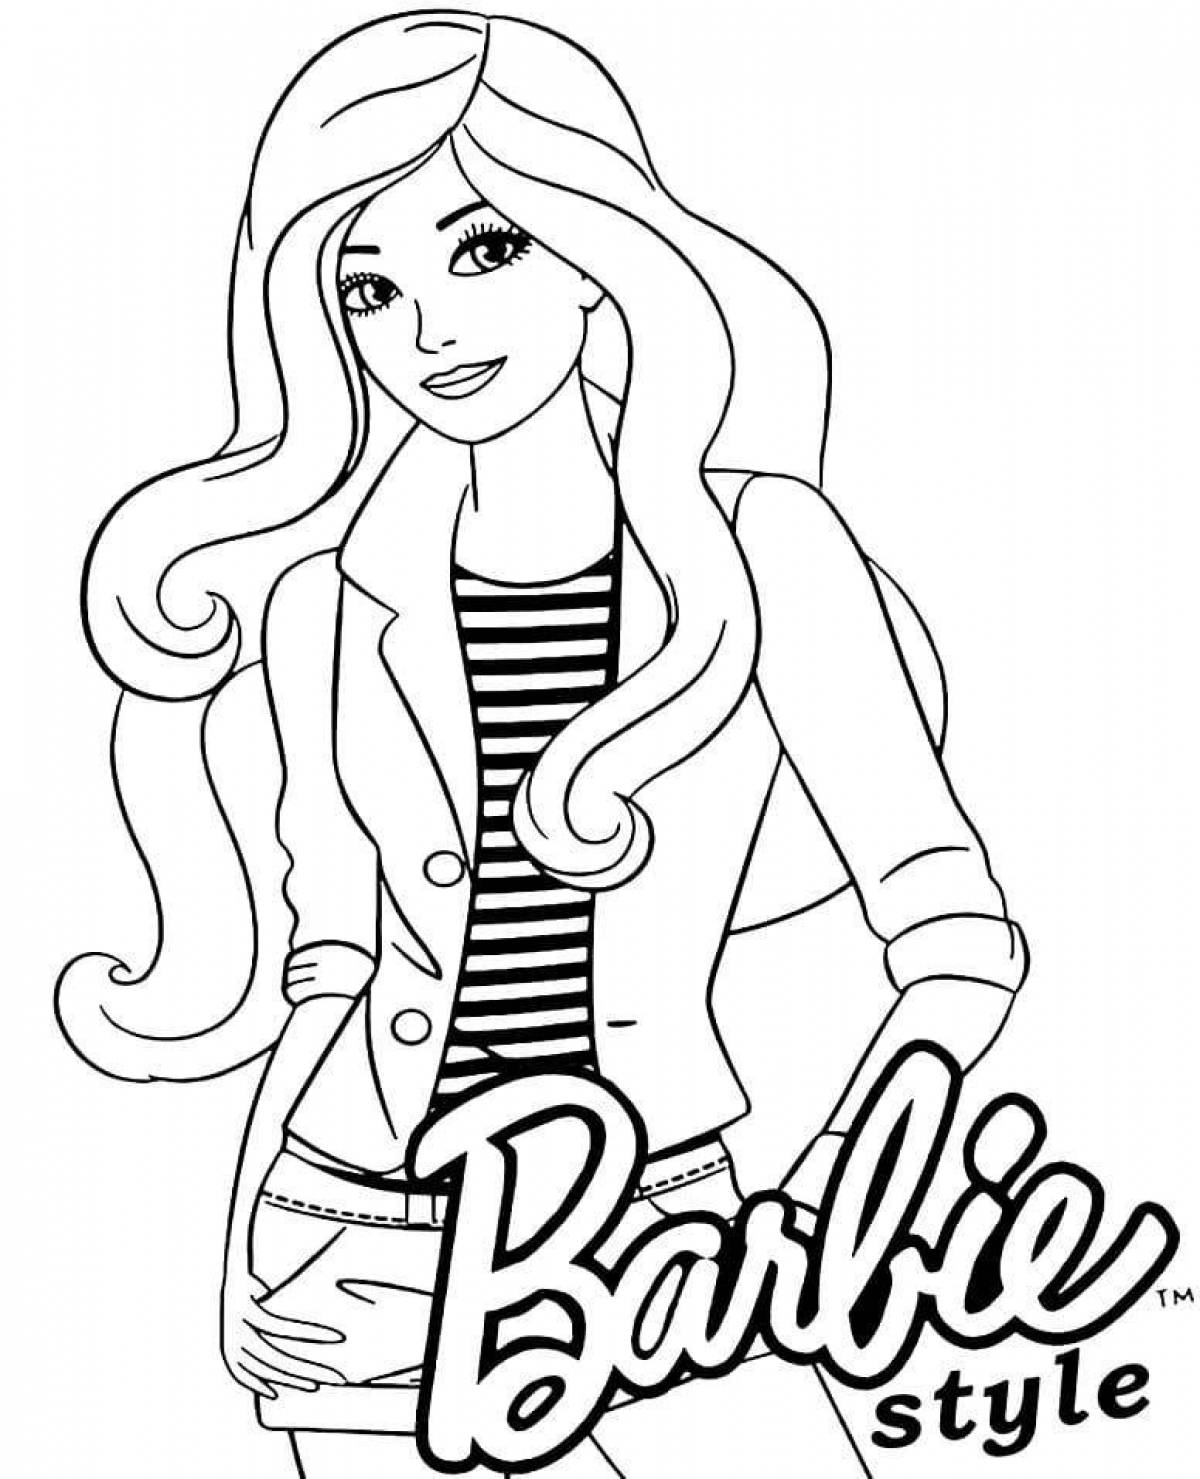 Friendly barbie doll coloring book for kids